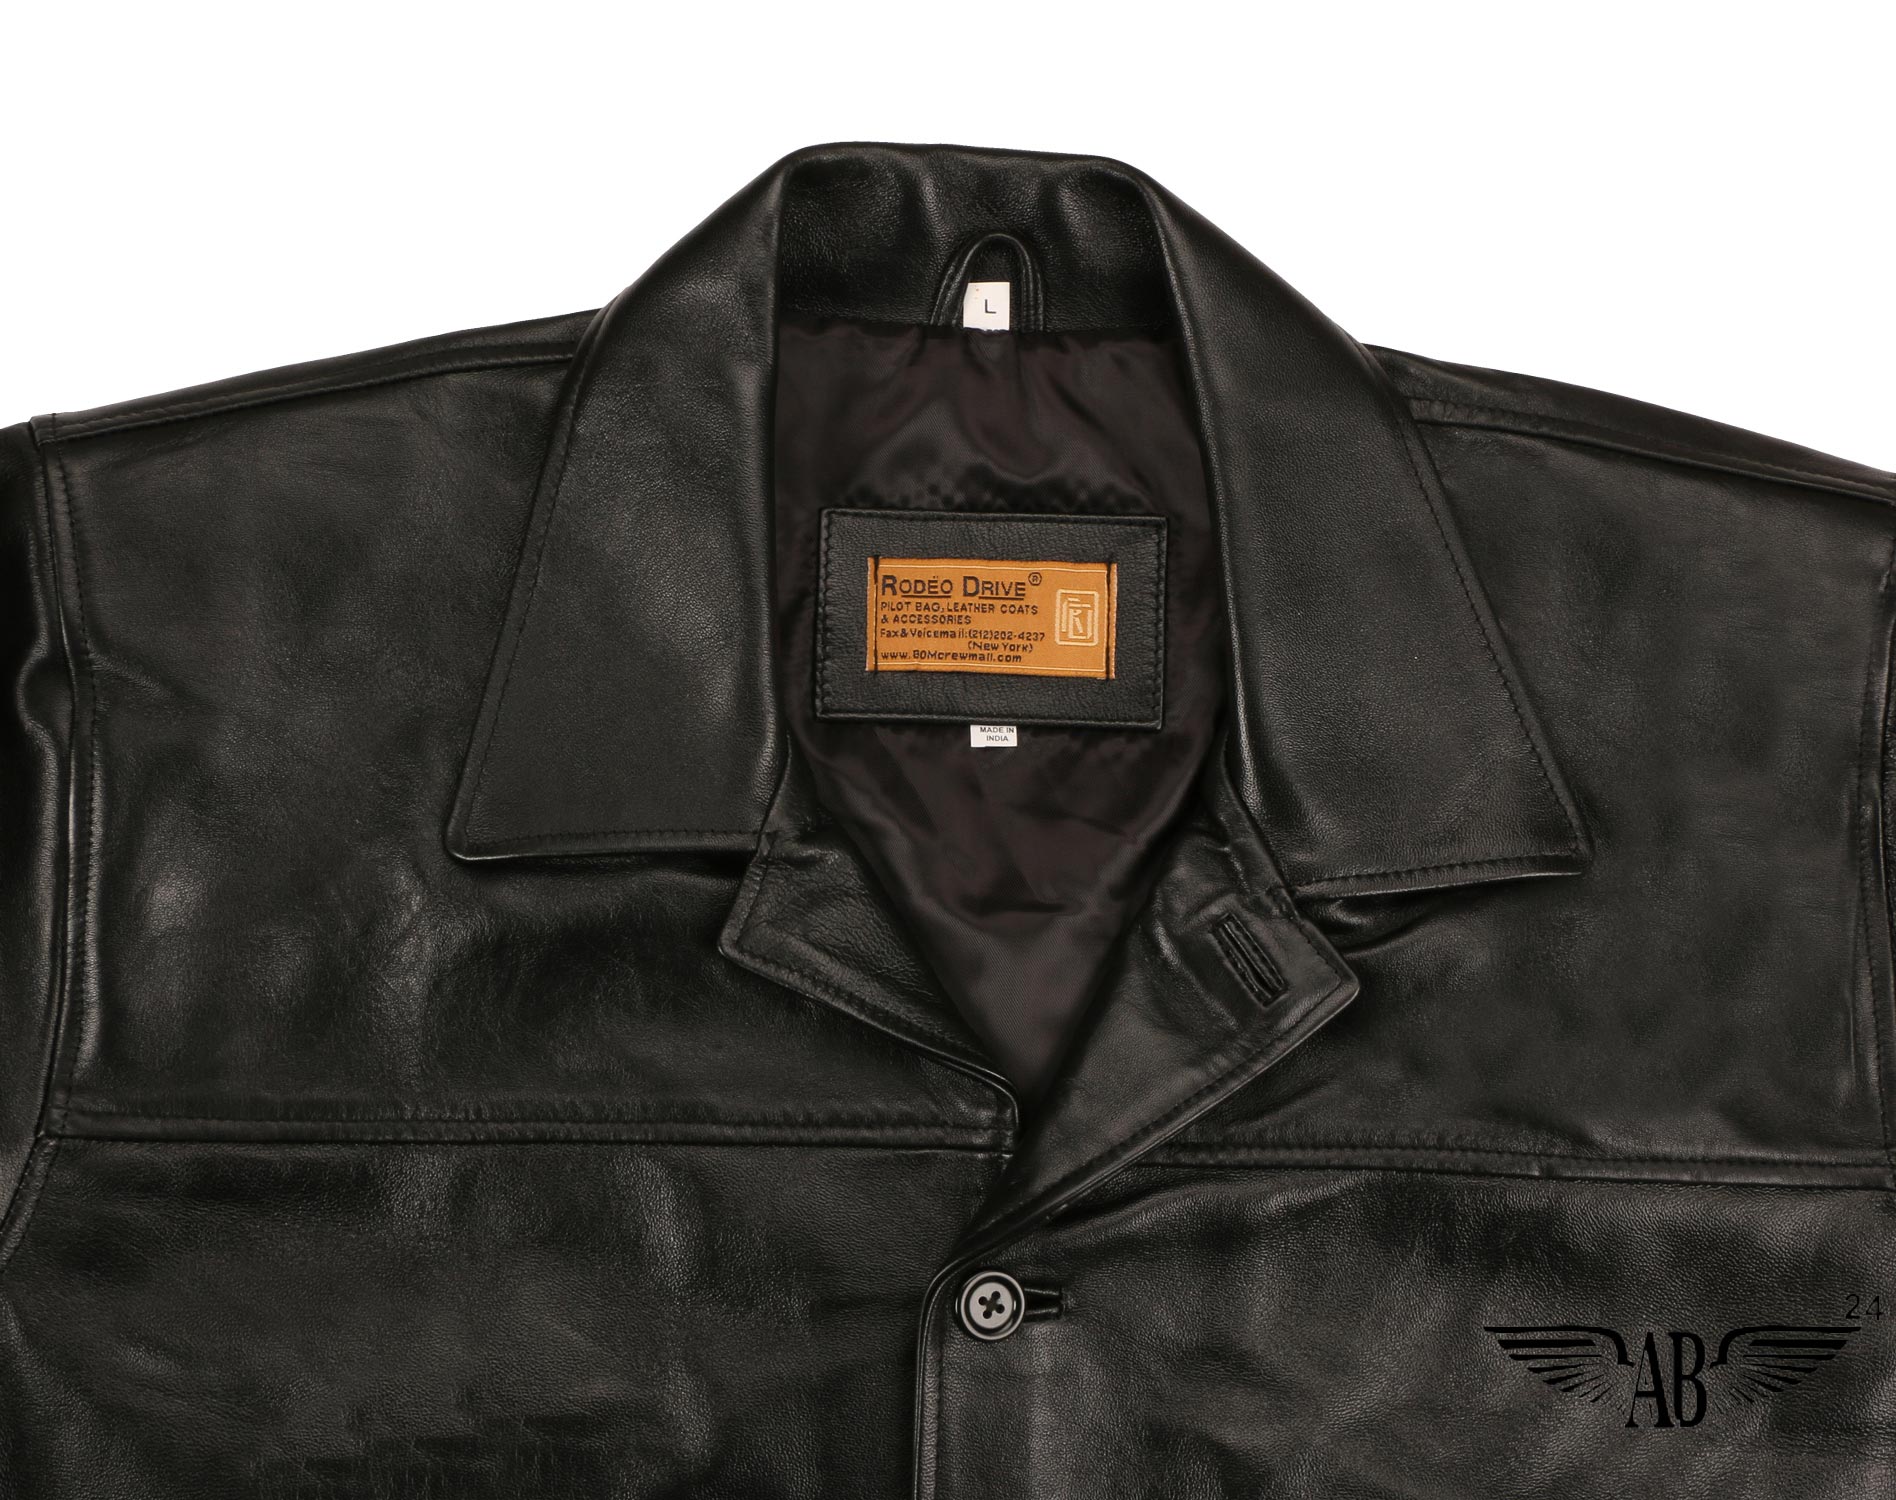 Front image of black CLASSIC CAR COAT.  It depicts  collar with Tag